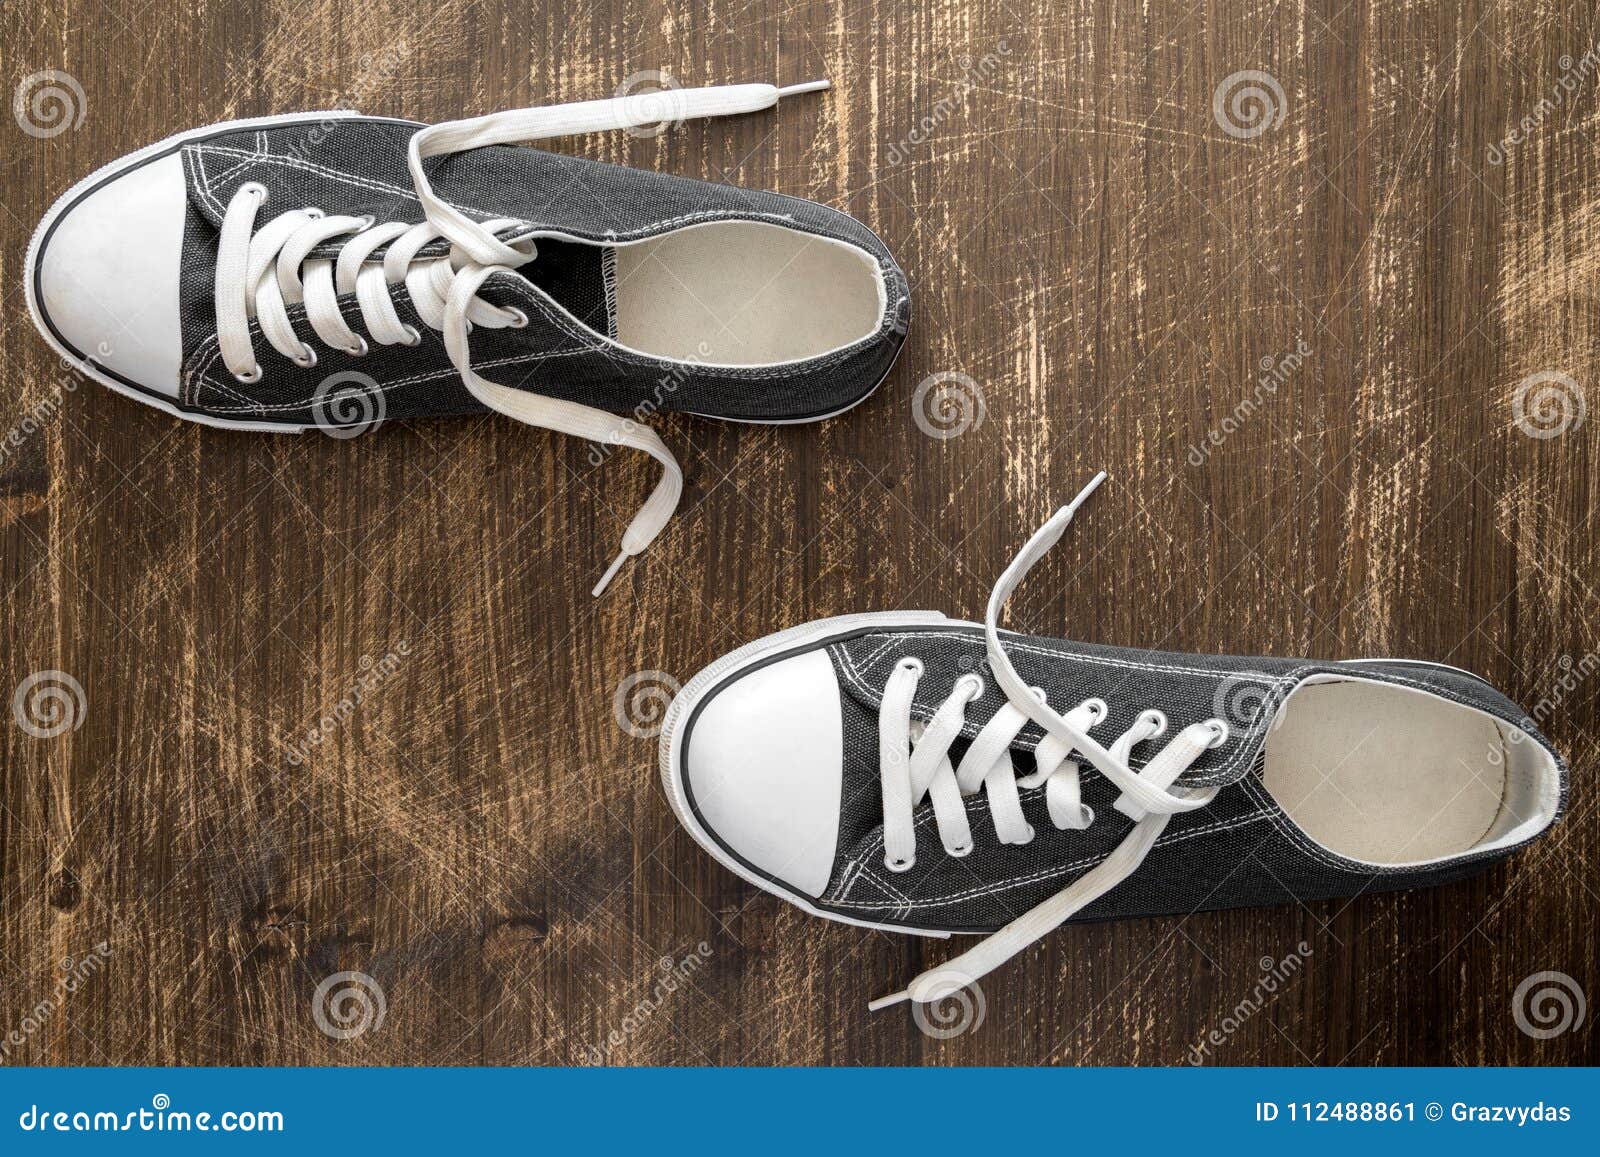 Top view of sneakers shoes stock image. Image of foot - 112488861